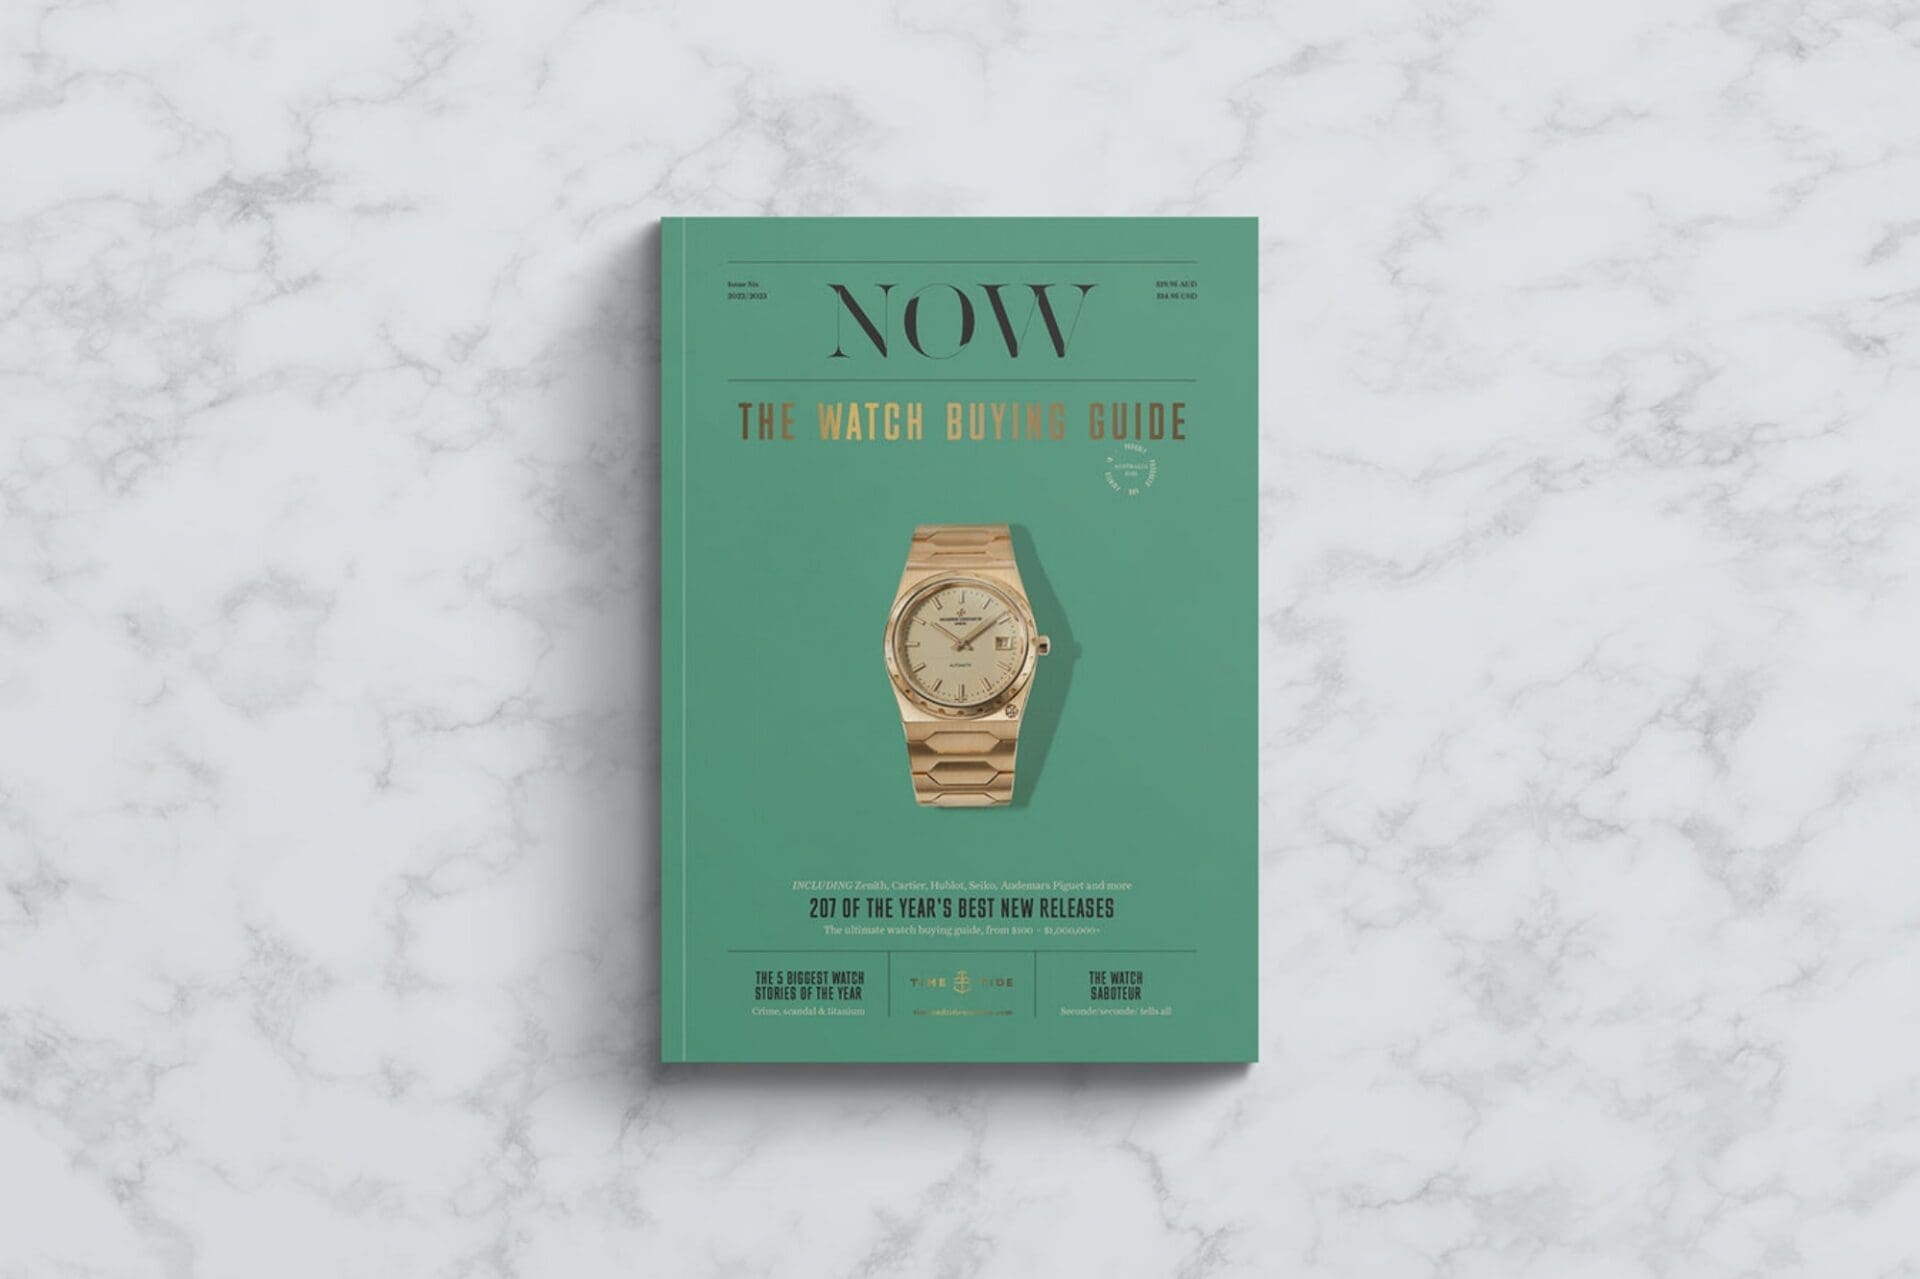 Five reasons to buy the new issue of NOW, the Time+Tide watch-buying guide